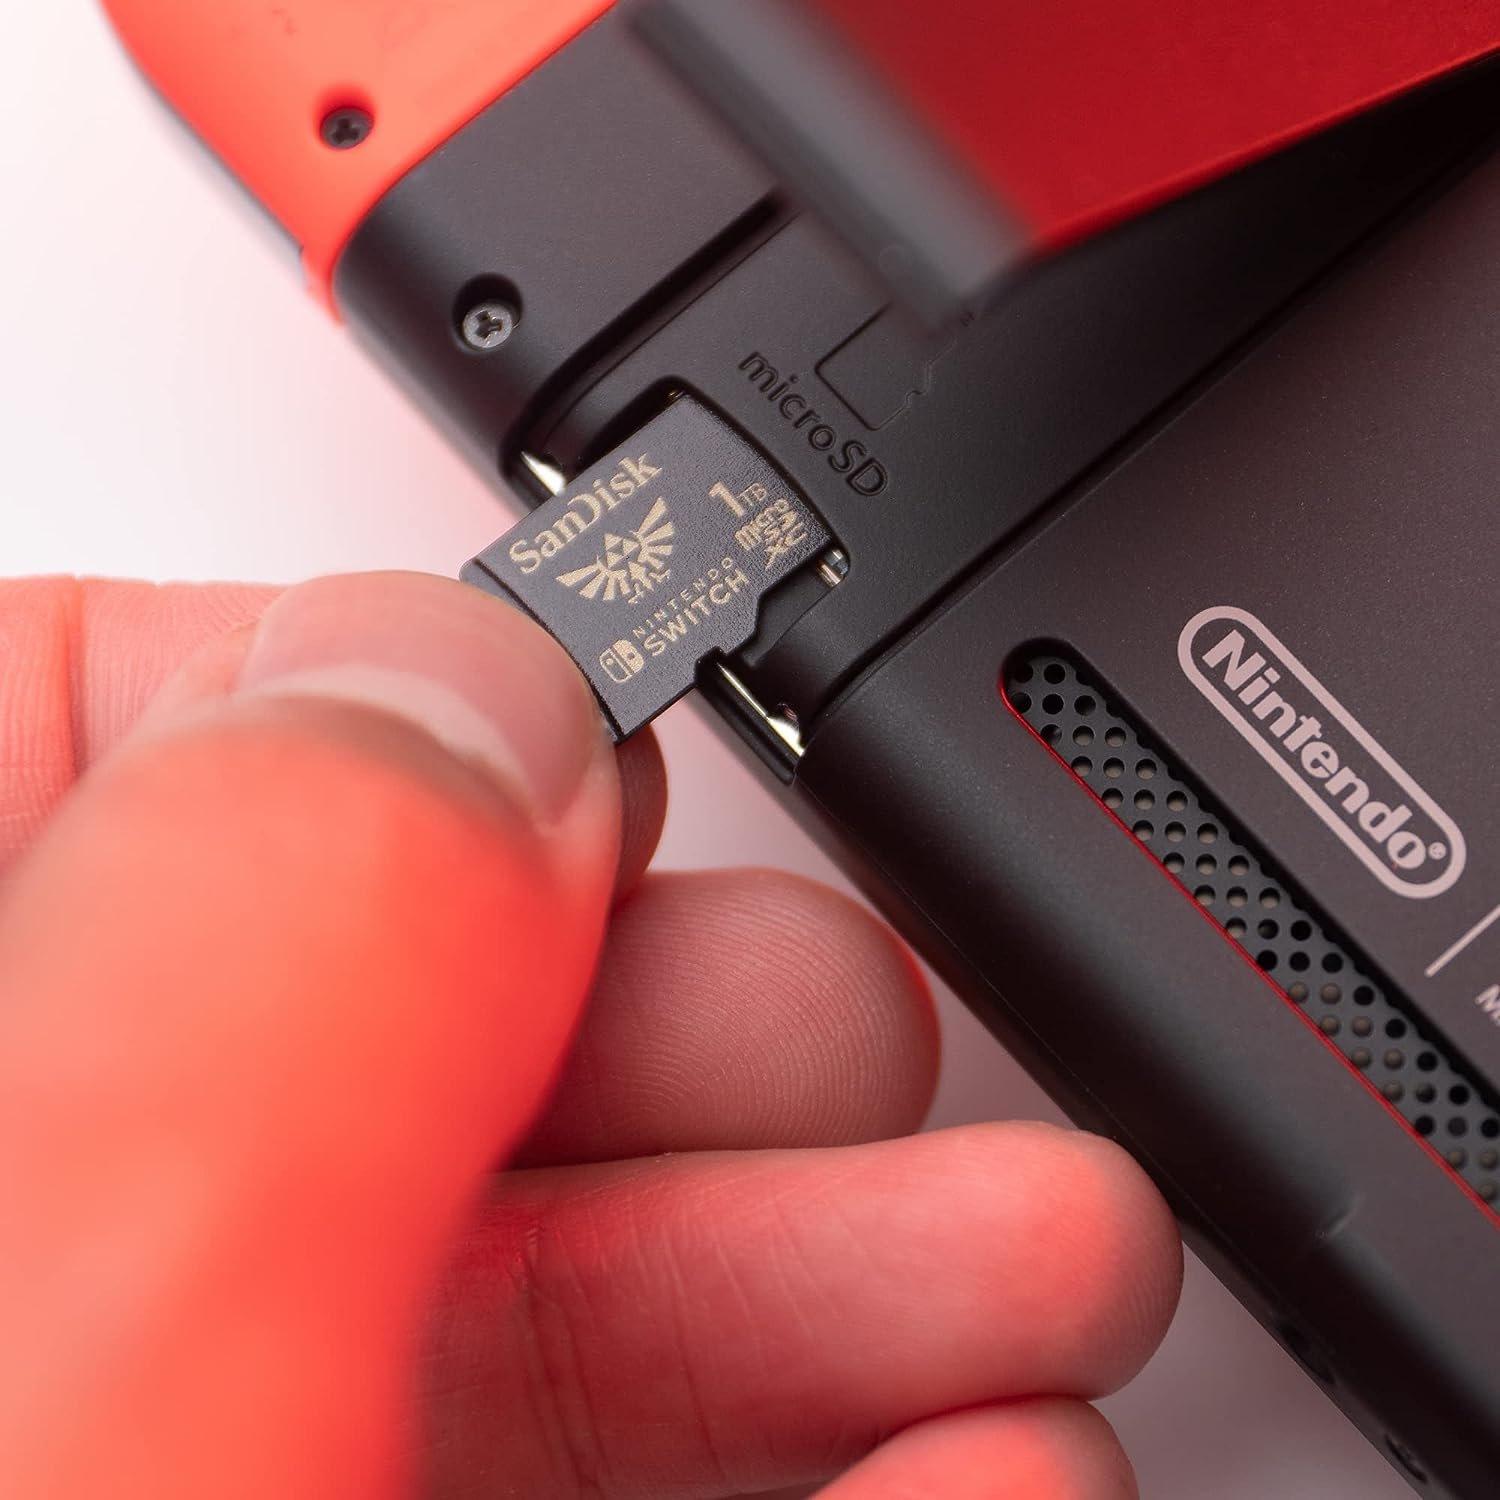 Are Nintendo-License SD cards the only sd cards that can be used for Switch?  : r/Switch